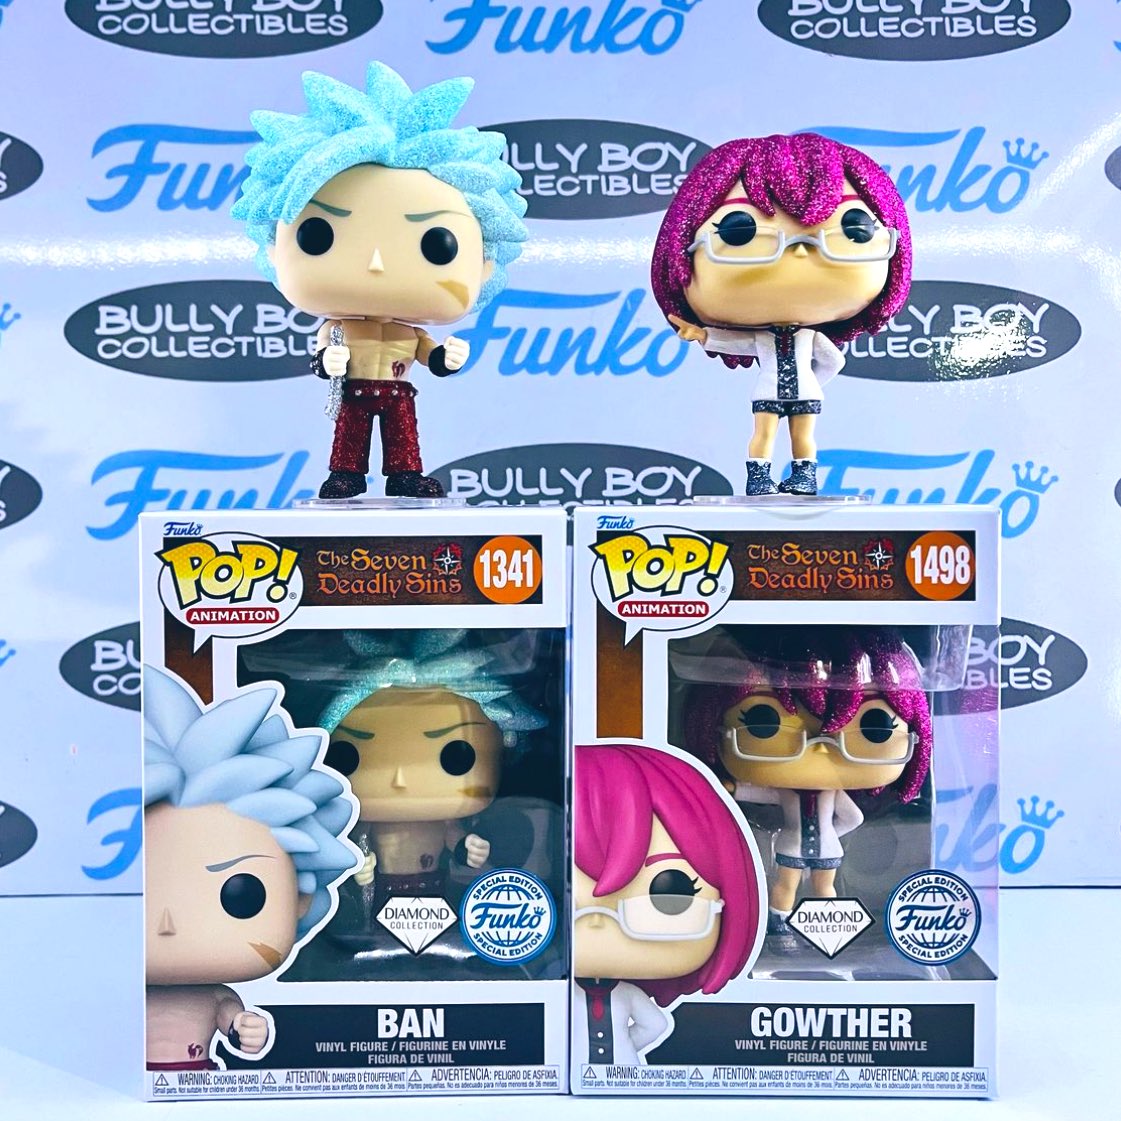 Diamond pals ~ Ban and Gowther Funko POPs! Side by side ~ 
Gowther ~ ee.toys/BZ0W8K
Ban ~ amzn.to/3tWT3b7
#Ad #SevenDeadlySins #FPN #FunkoPOPNews #Funko #POP #POPVinyl #FunkoPOP #FunkoSoda